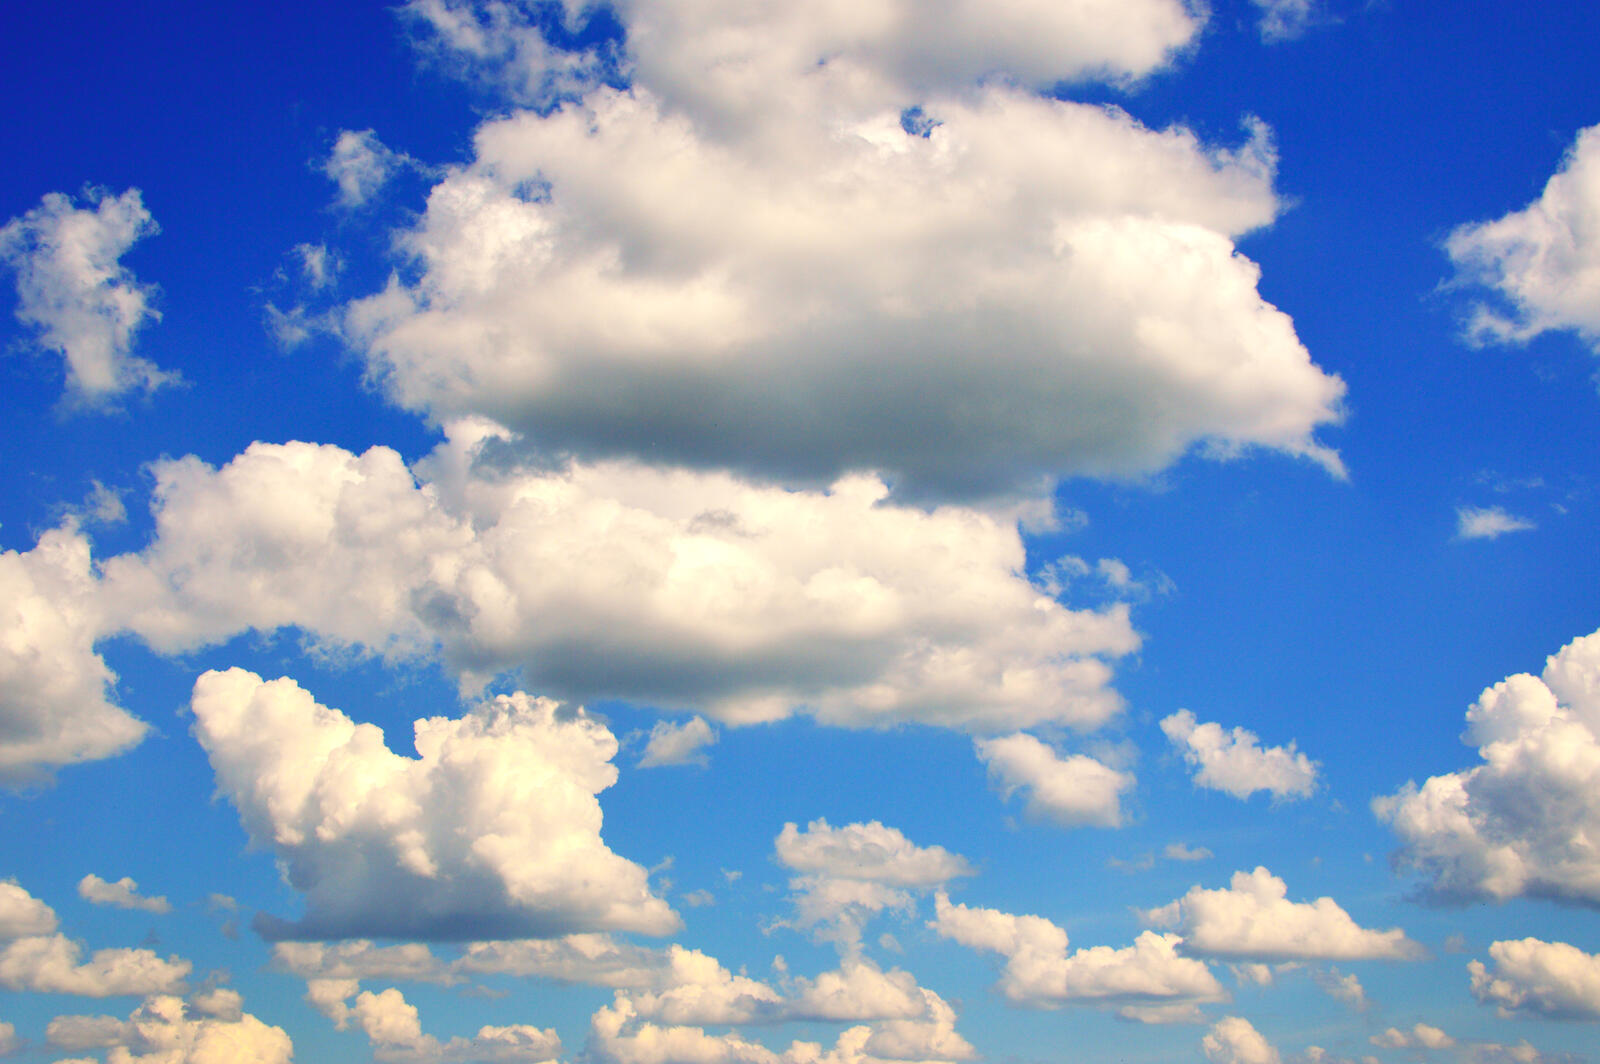 Wallpapers sky cloudy background on the desktop